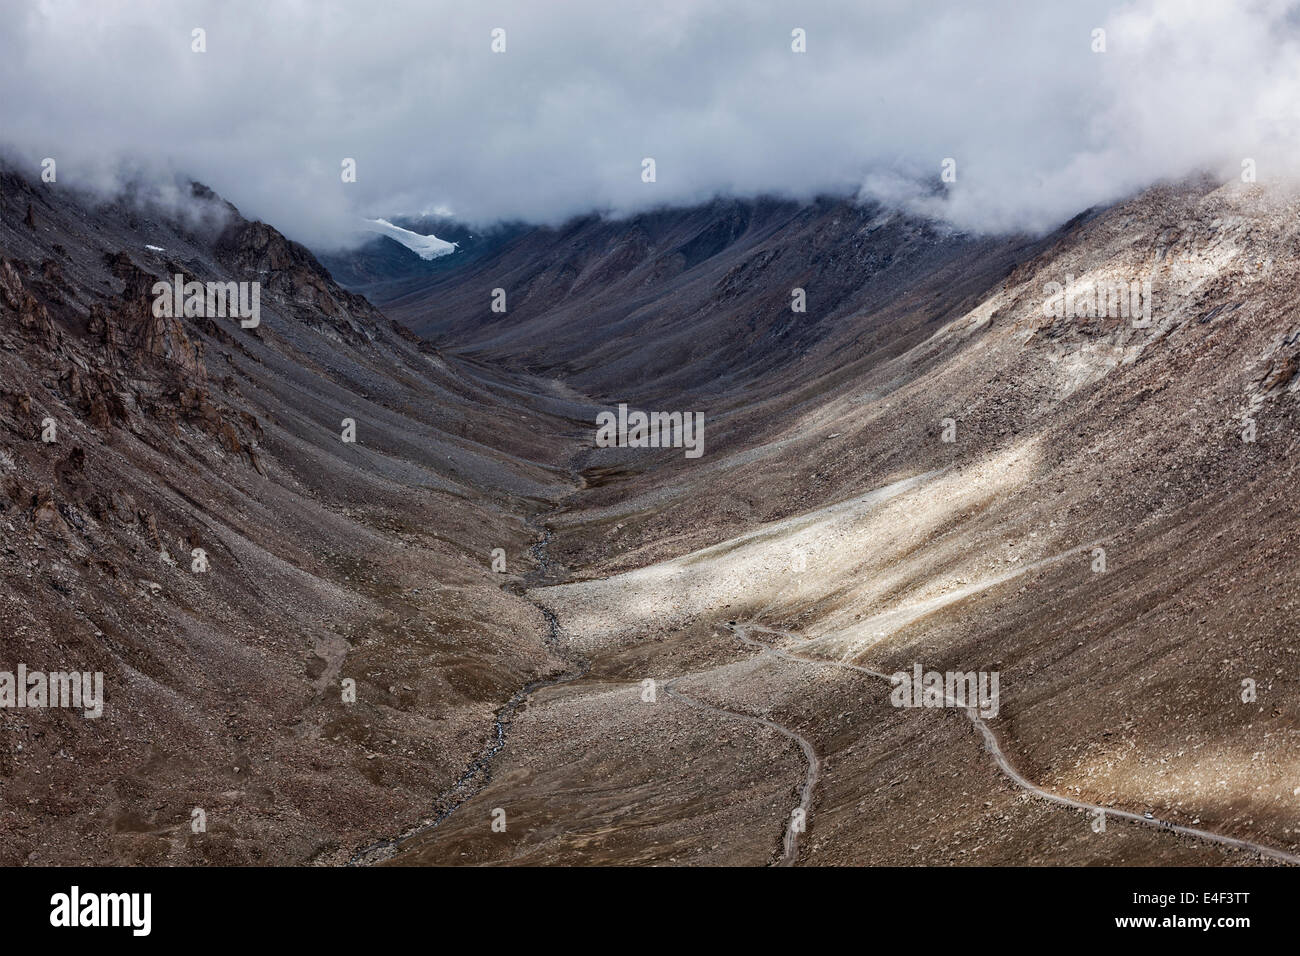 Himalayan valley landscape with road near Kunzum La pass - allegedly the highest motorable pass in the world (5602 m), Ladakh Stock Photo